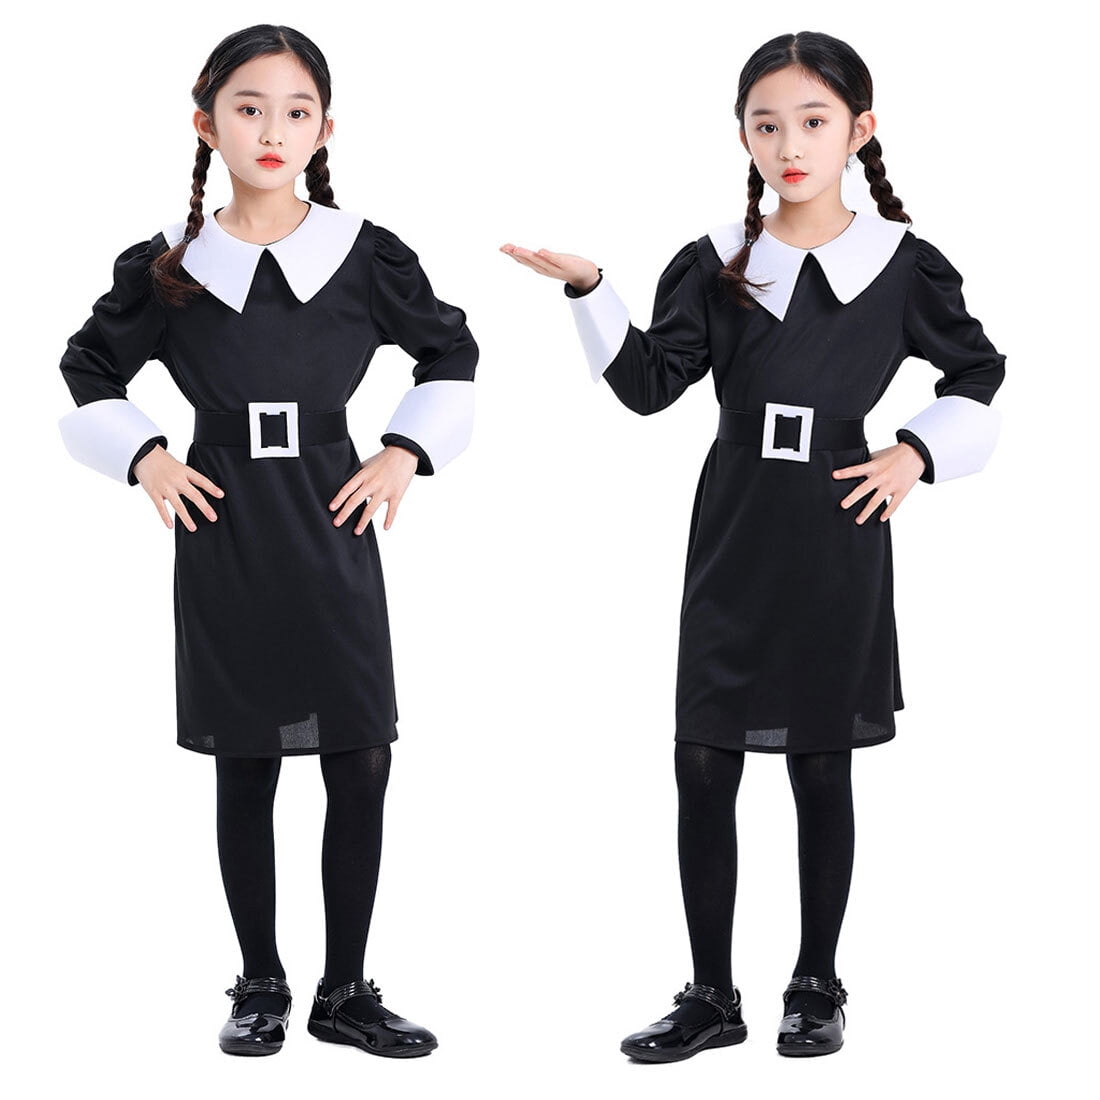 Girls Wednesday Dress Addams Family Costume Black Dress Up for 3-9 Year ...